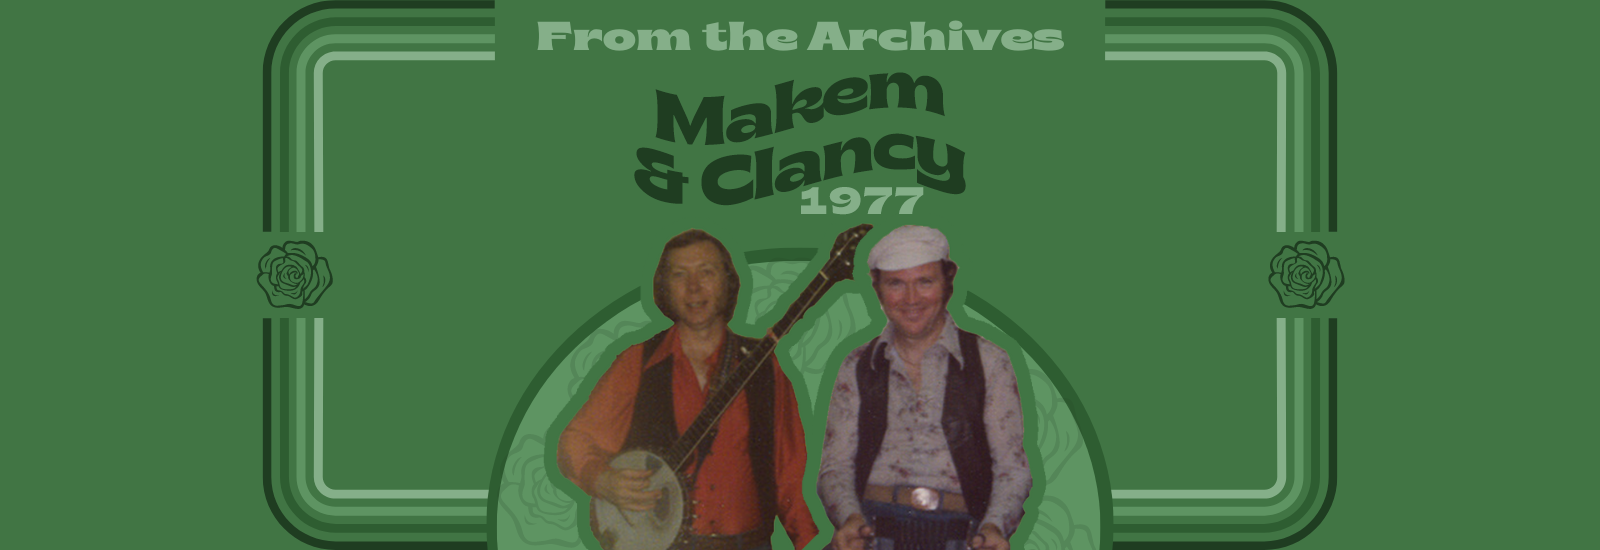 Makem and Clancy 1977 #110